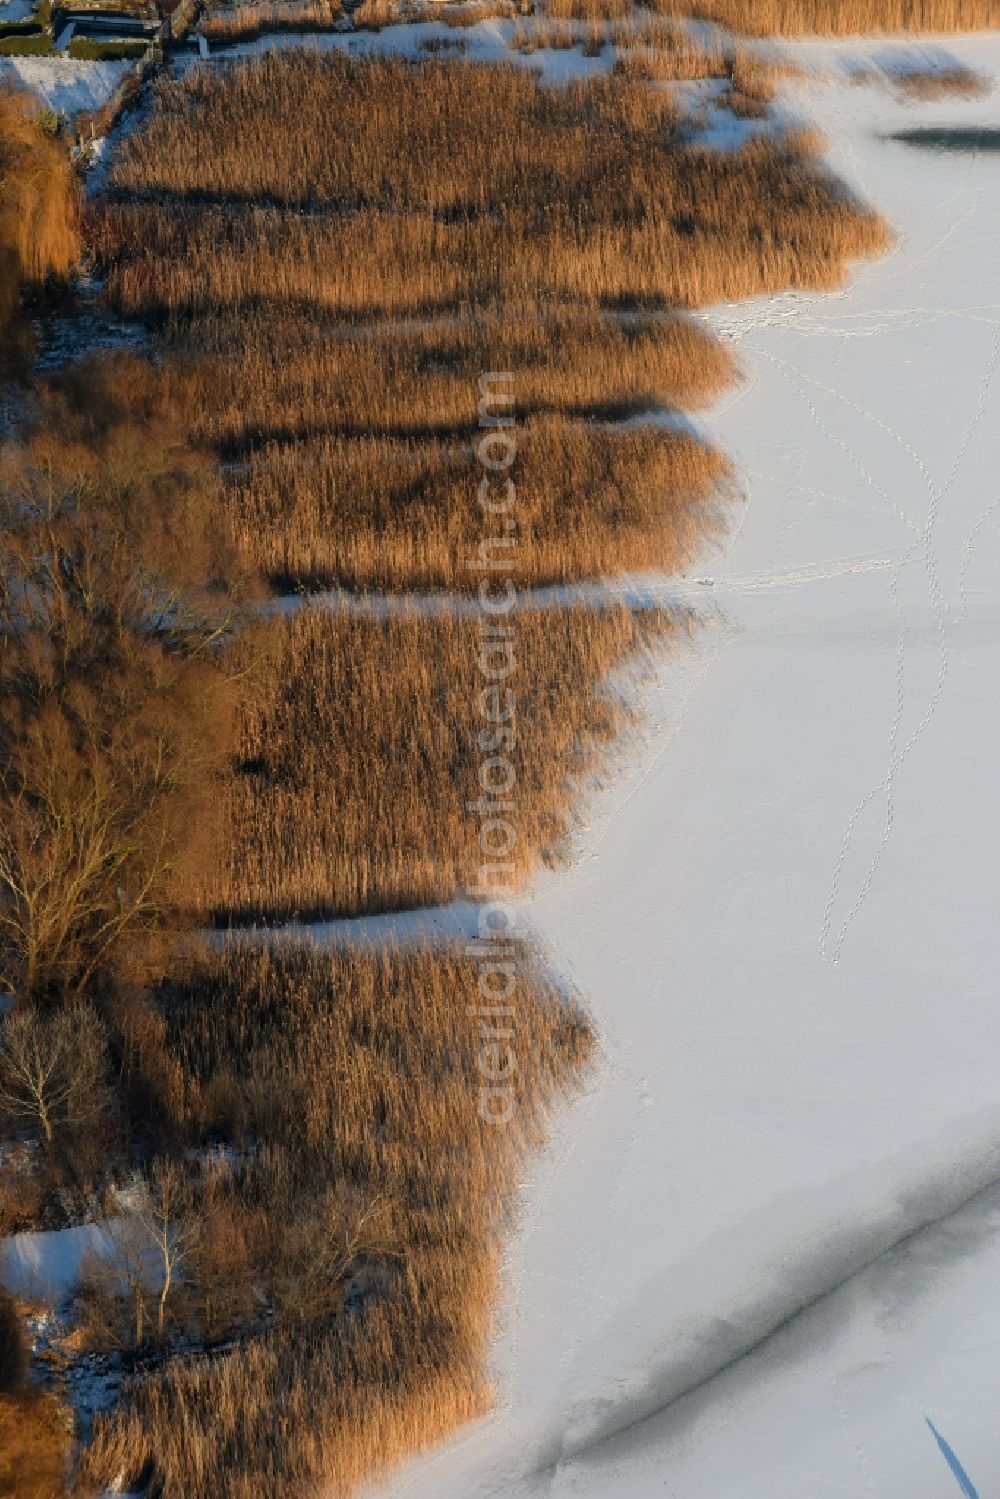 Aerial image Päwesin - Wintry snow and ice-covered surfaces of the reed sea shore areas in Bollmannsruh in Brandenburg